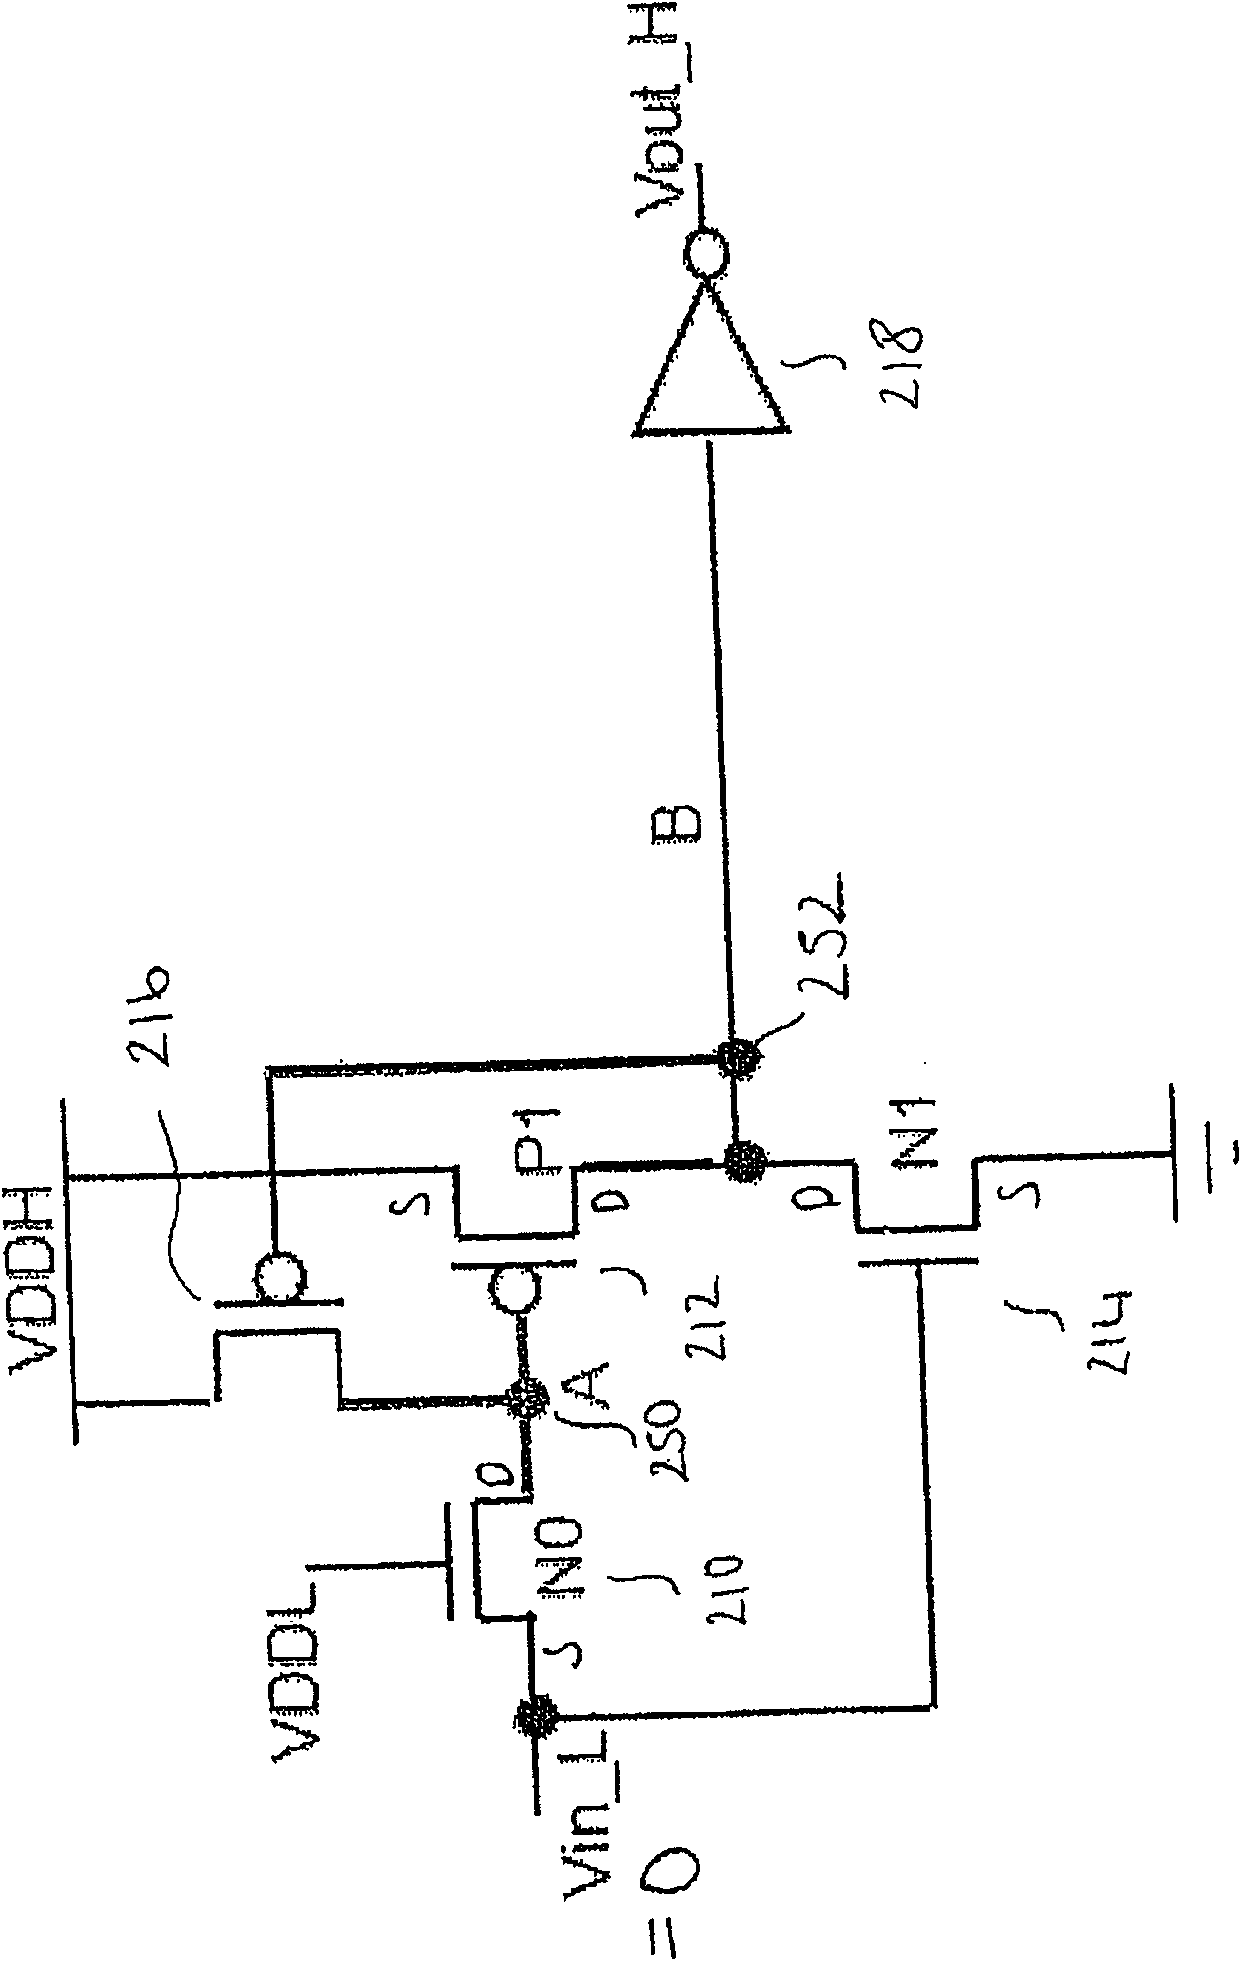 A voltage level shifter